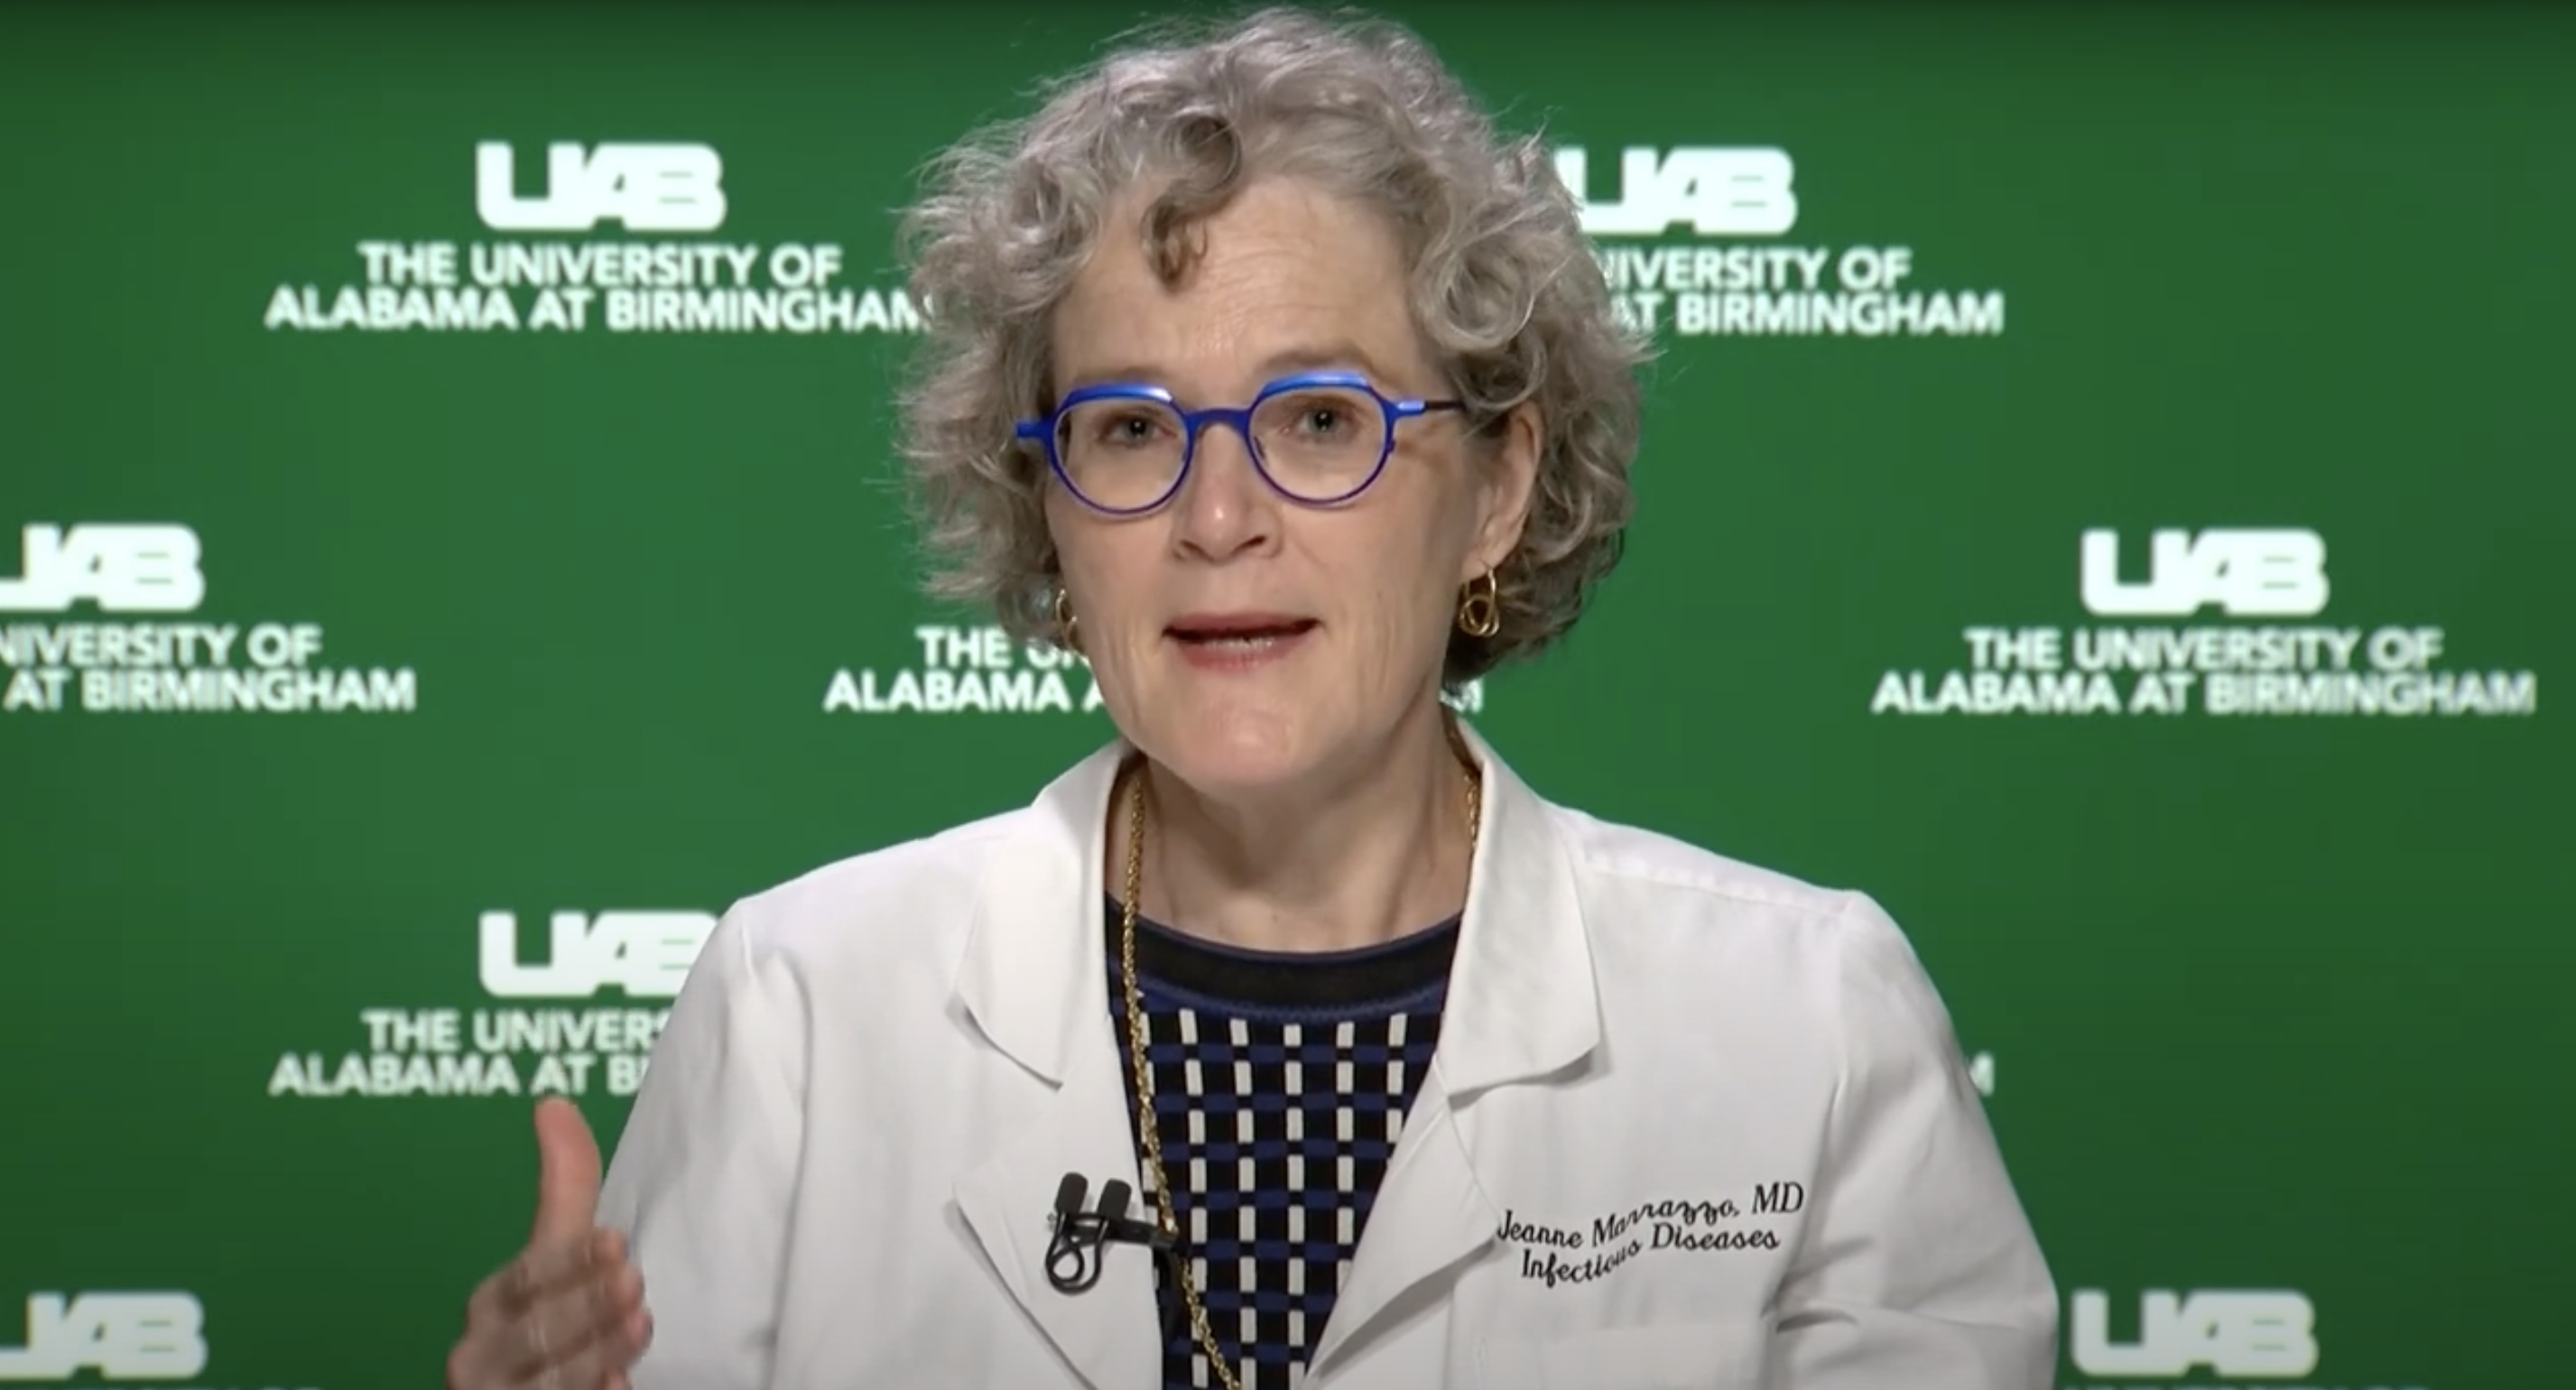 A white woman with glasses speaks against a green and white backdrop.